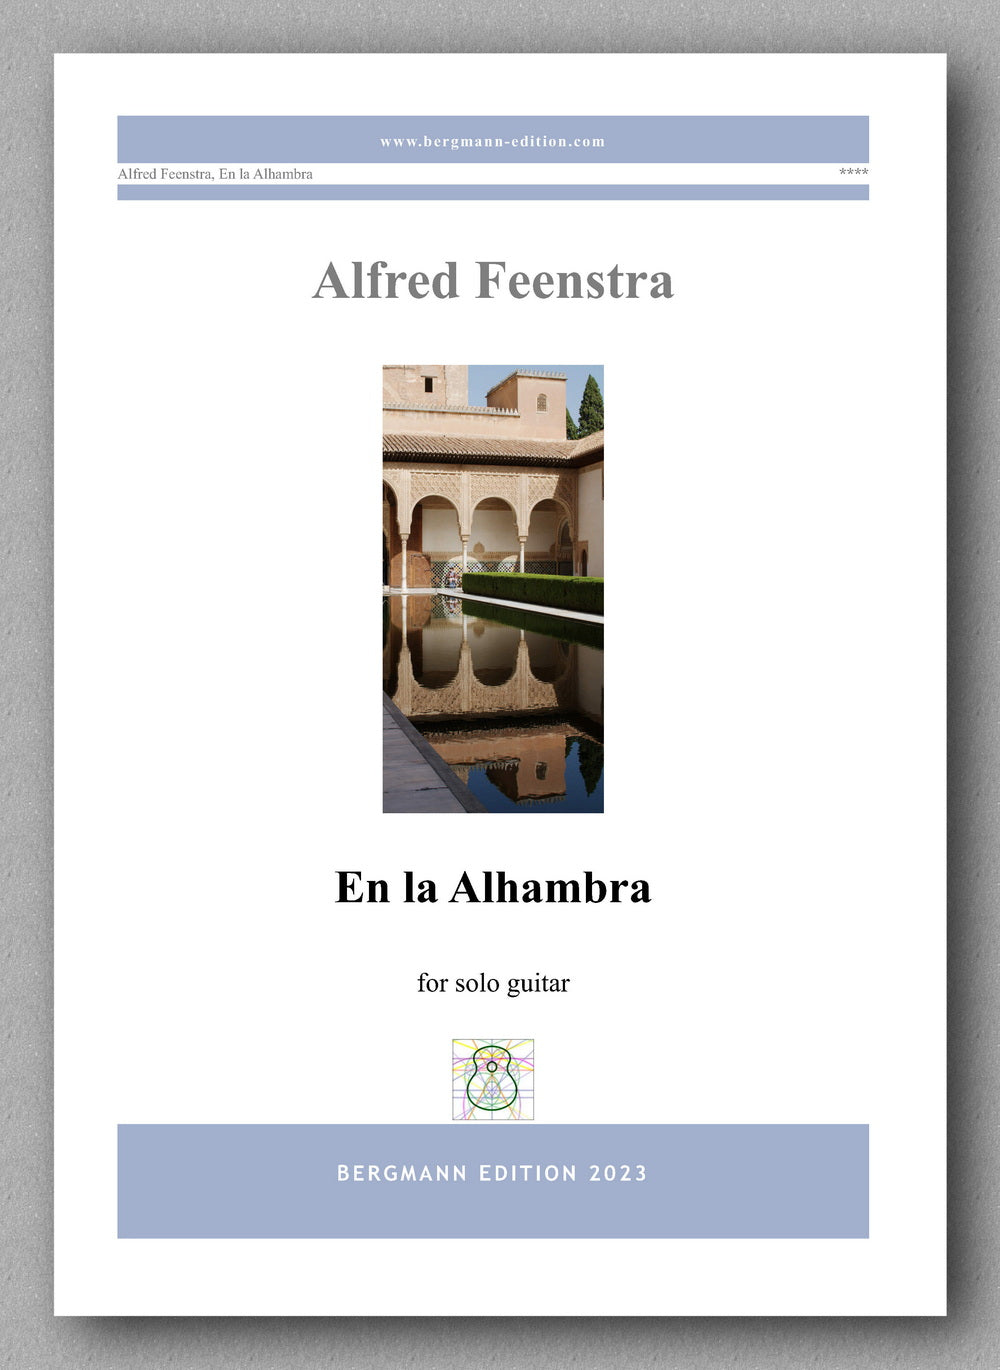 Alfred Feenstra, En la Alhambra - preview of the cover